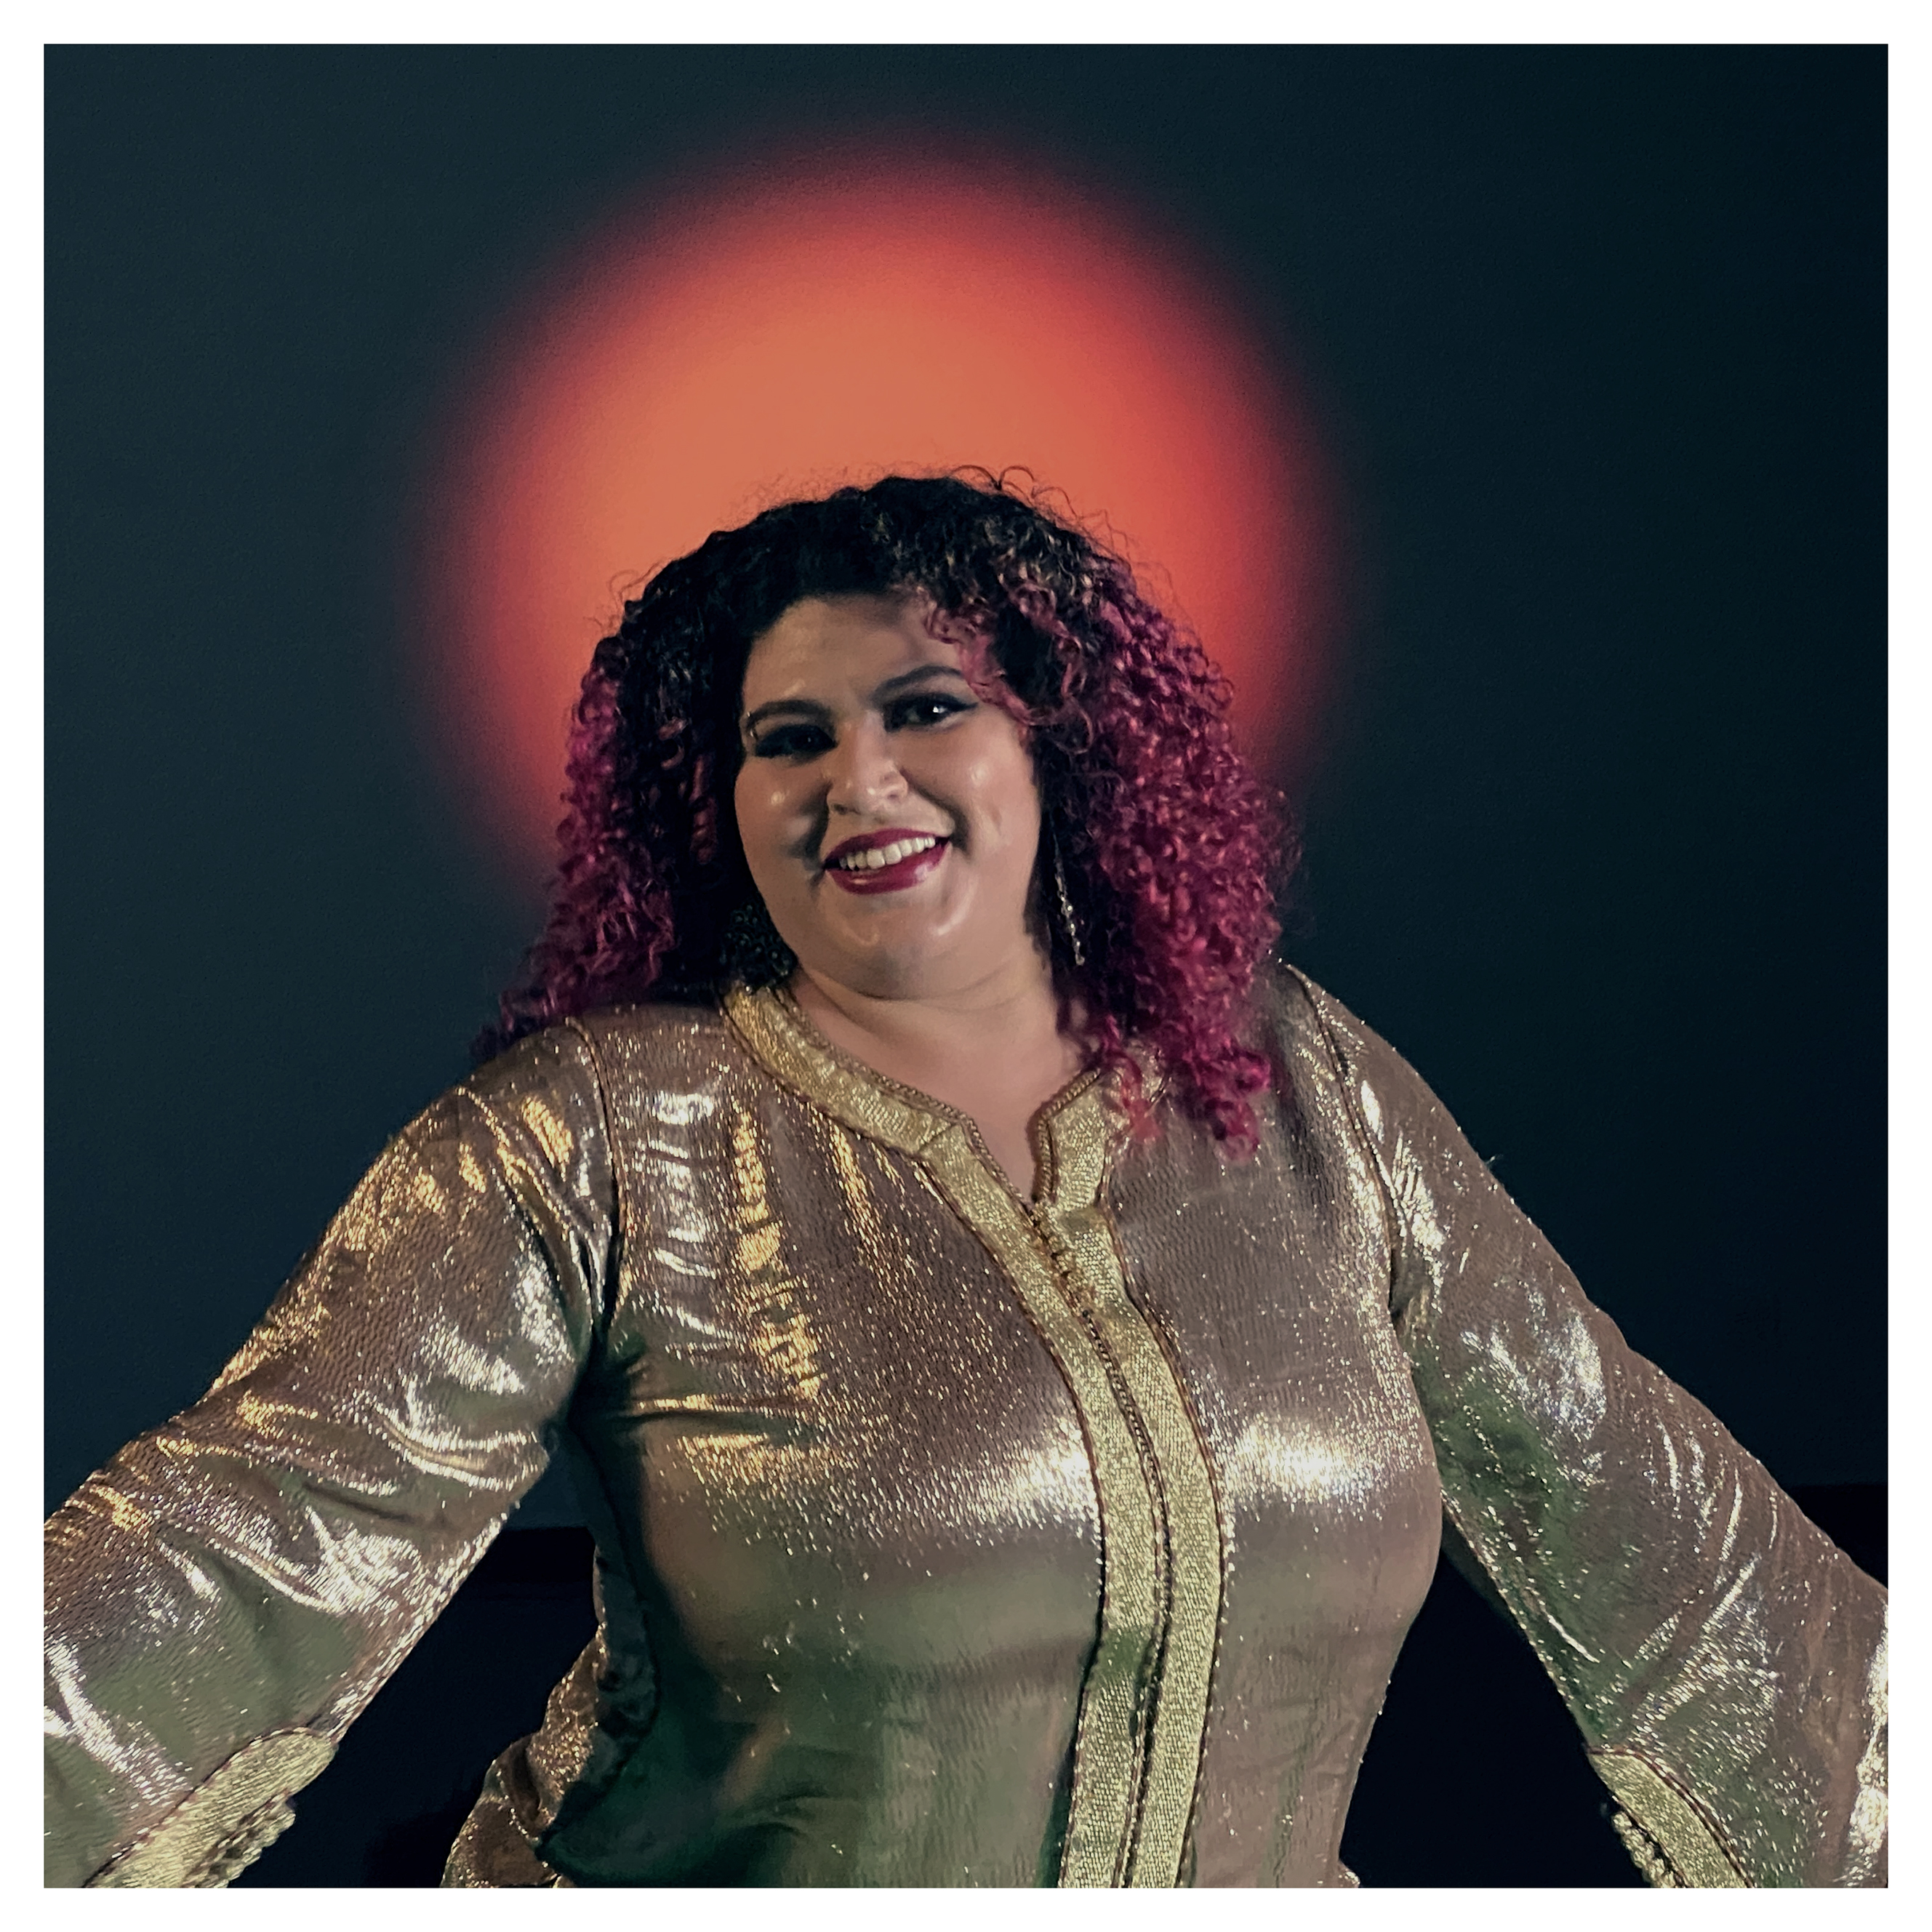 Esraa Warda in the Movement Lab in gold dress and red circular light behind her. Photo by Guy de Lancey